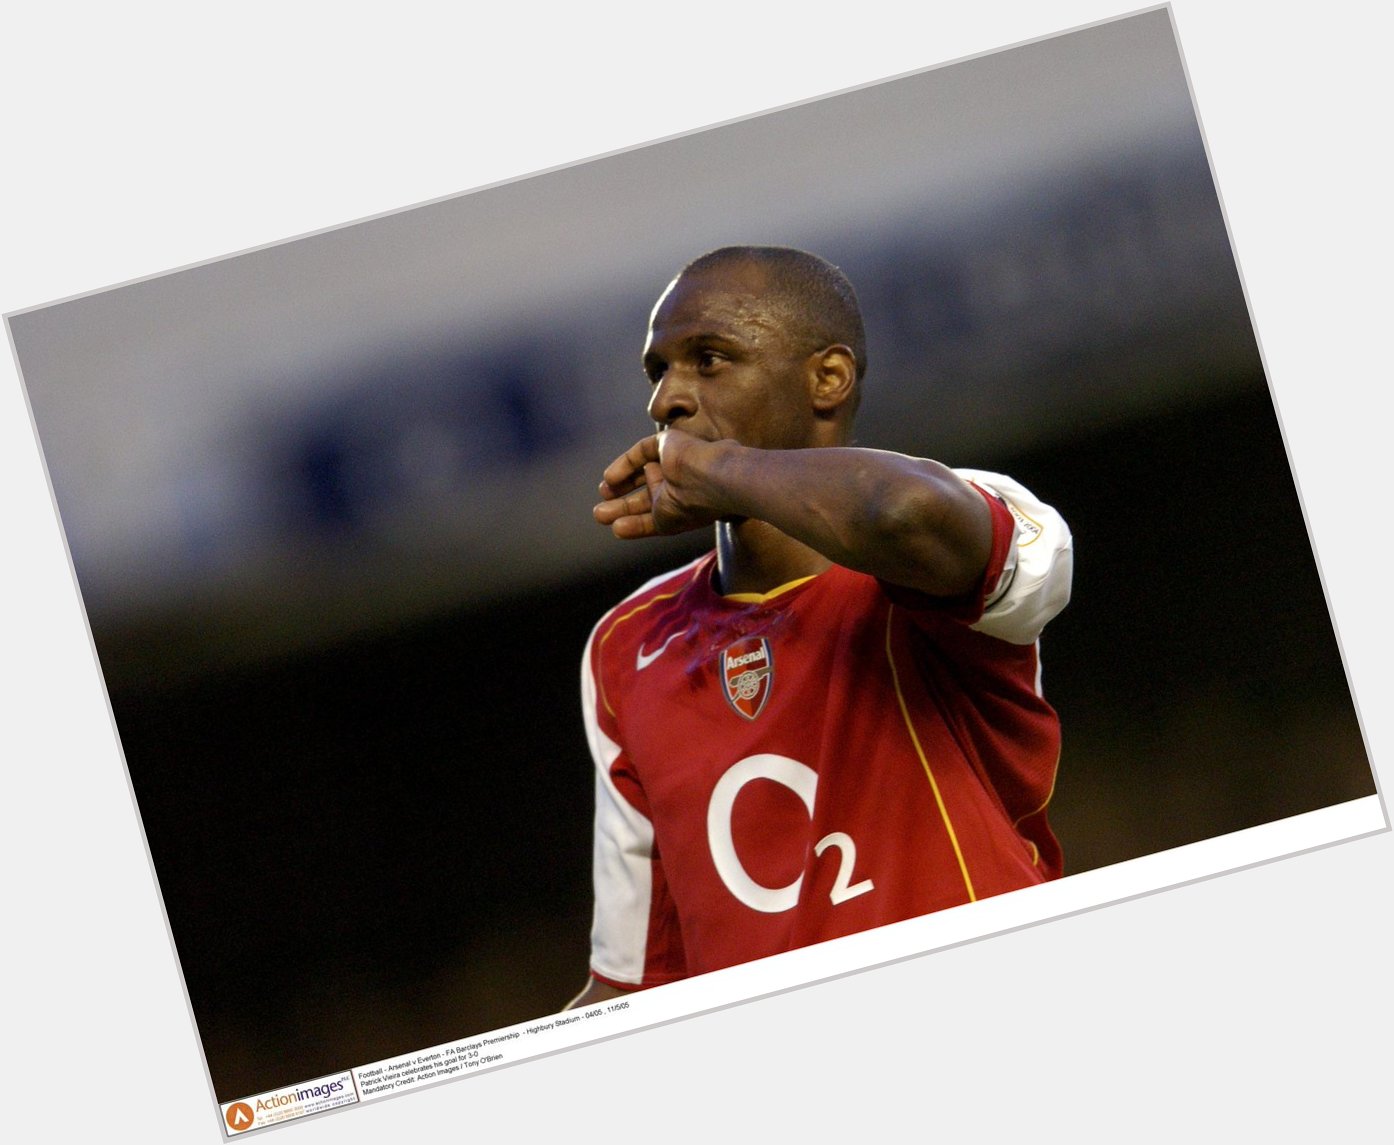 Happy 39th birthday to Arsenal legend Patrick Vieira. He won 3 Premier League titles and 4 FA Cups with the club. 